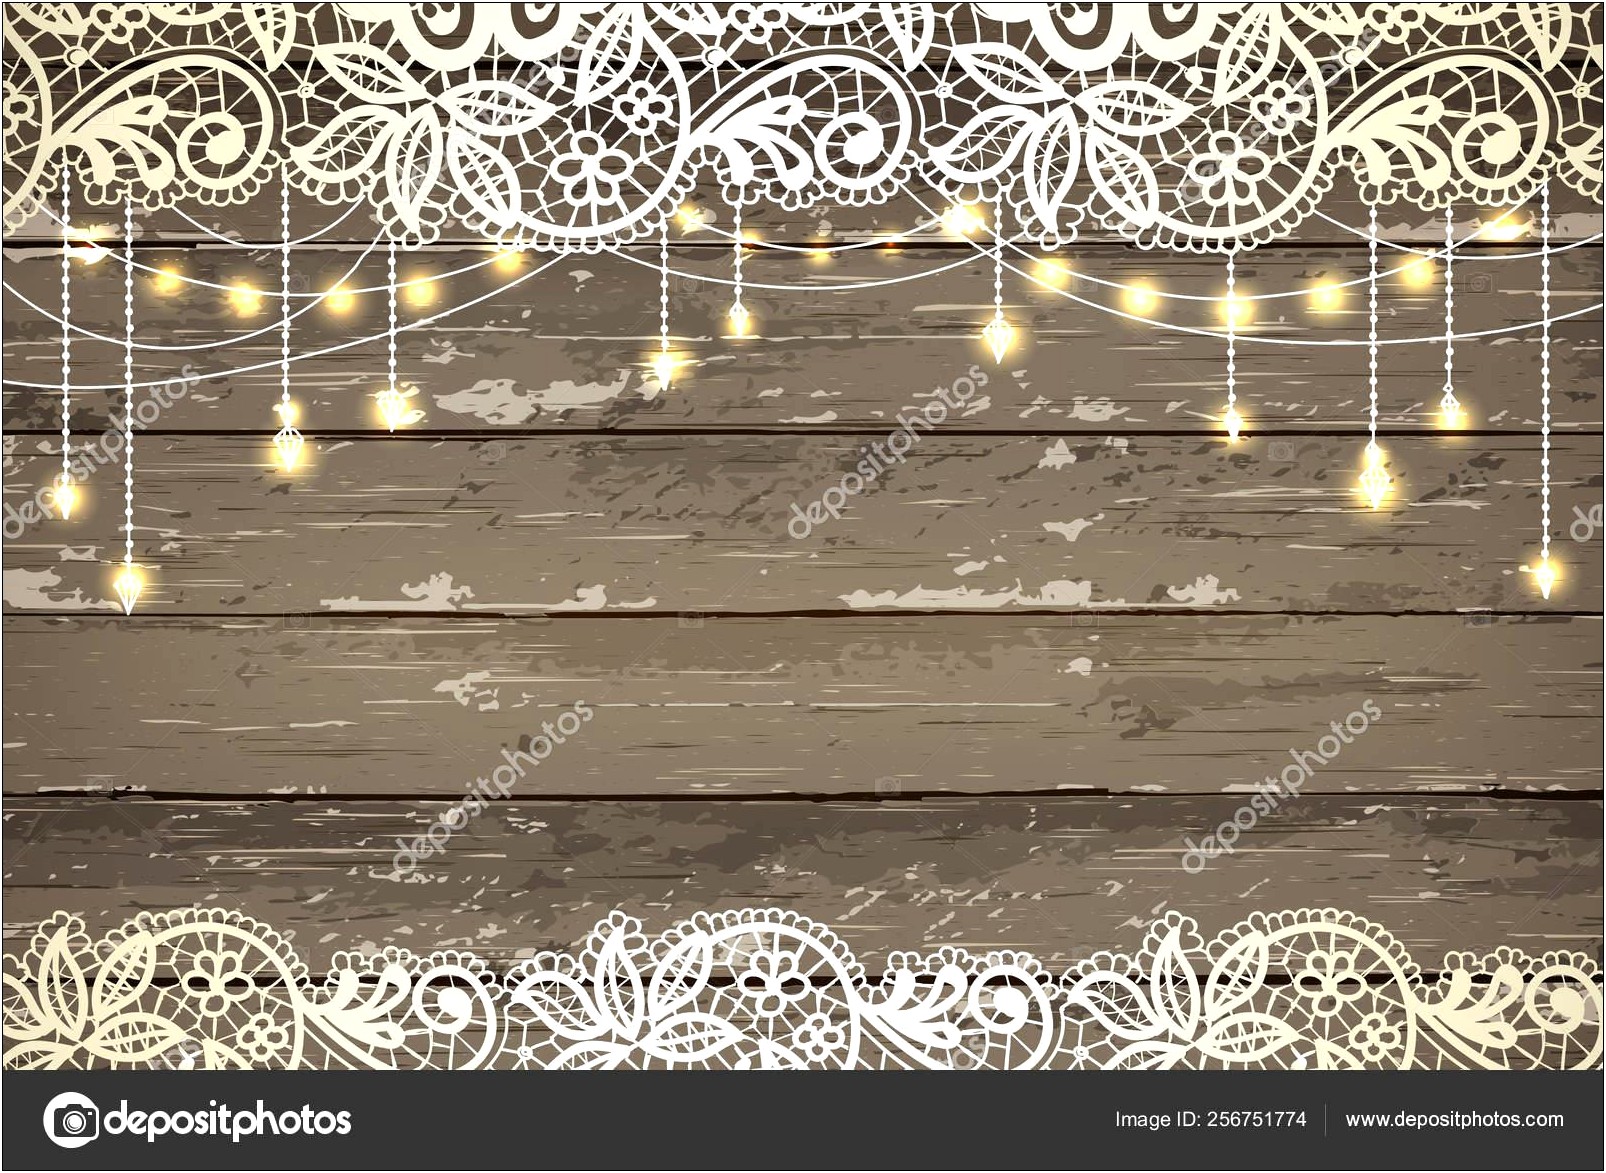 Blank Rustic Wedding Invitation Background With Lights